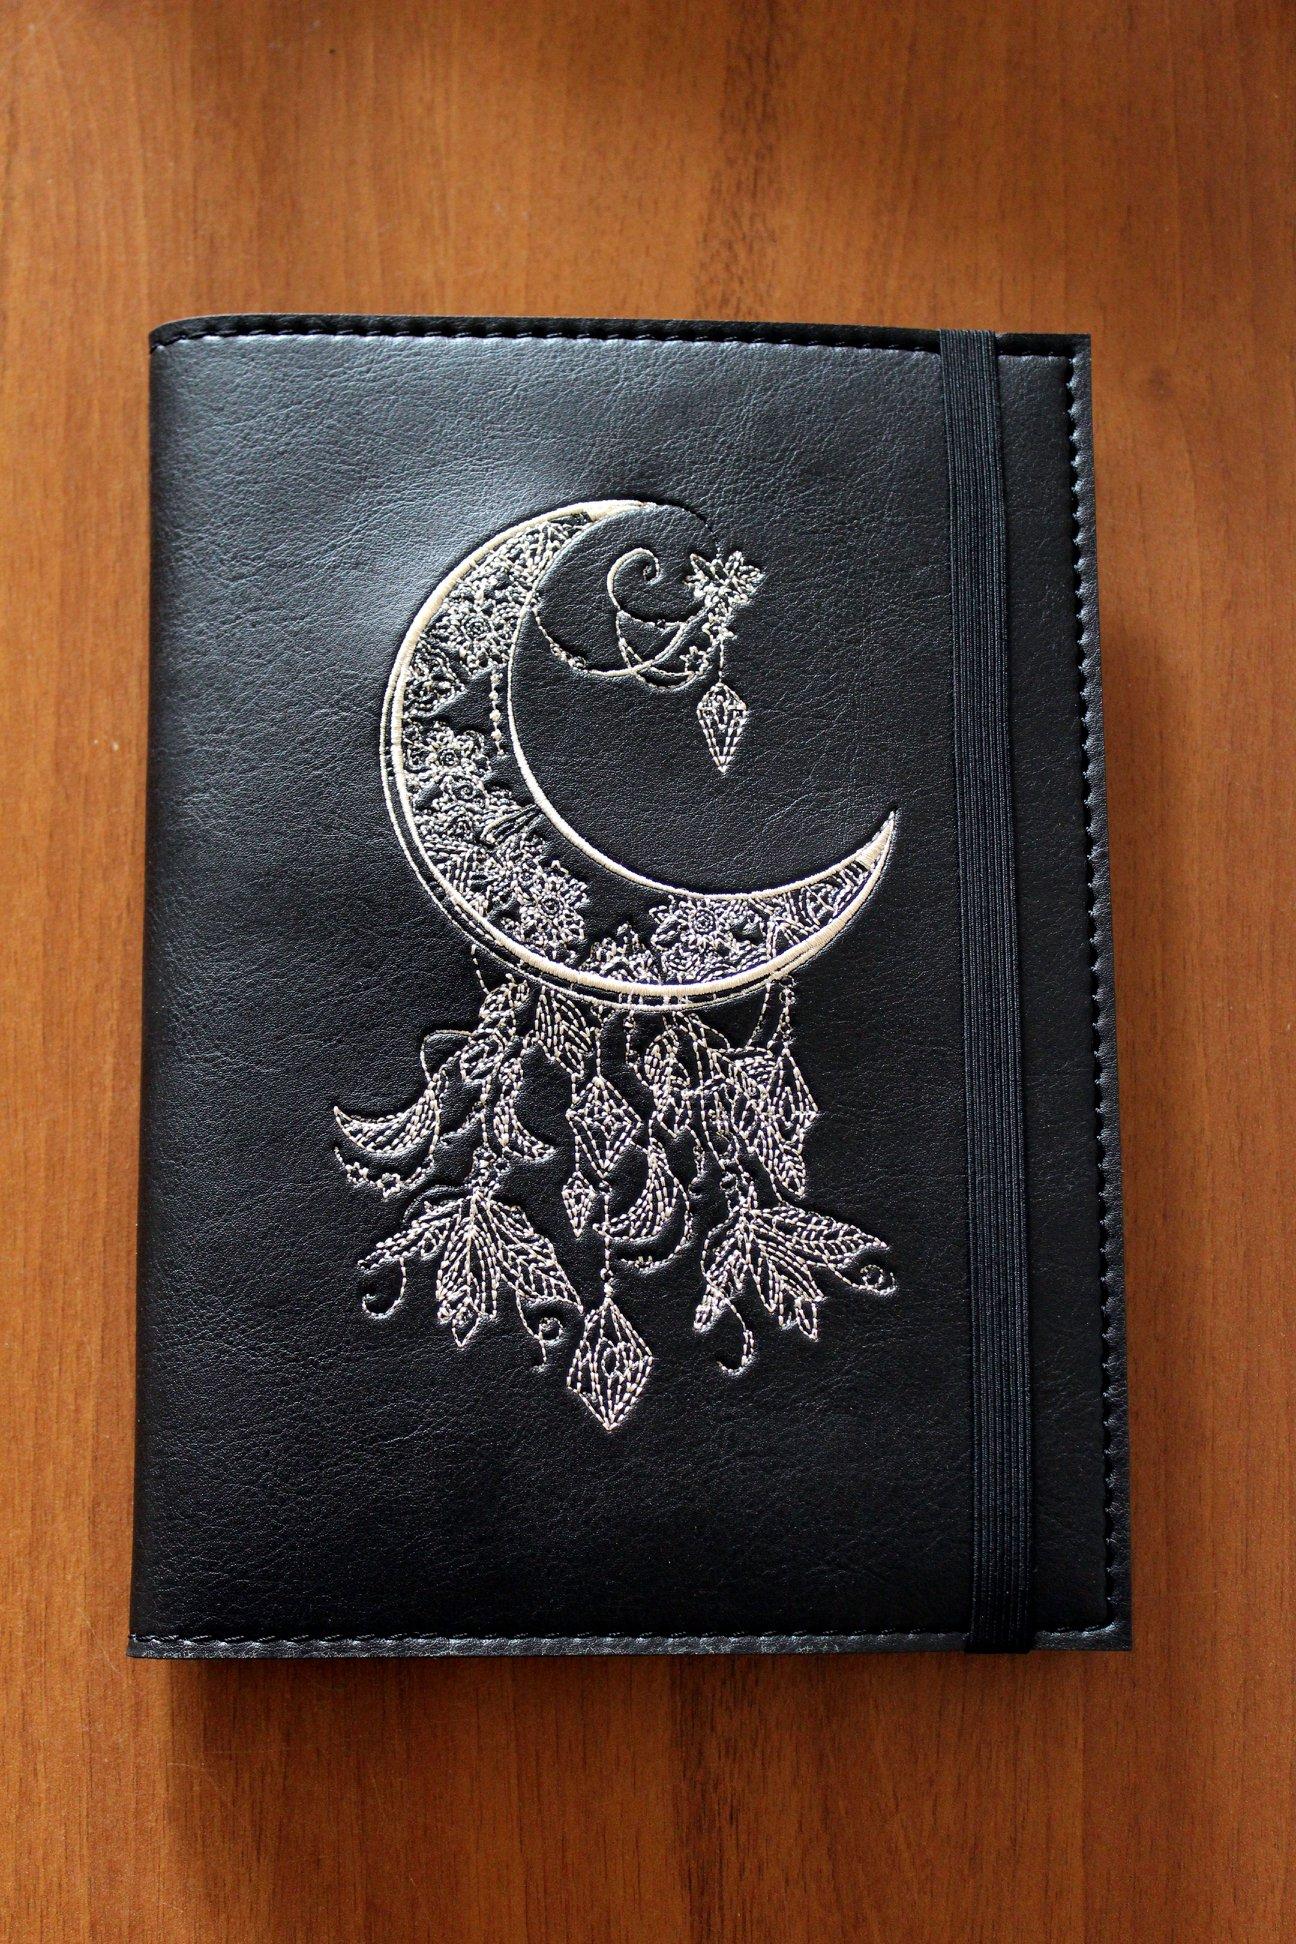 Embroidered cover with Moon embroidery design